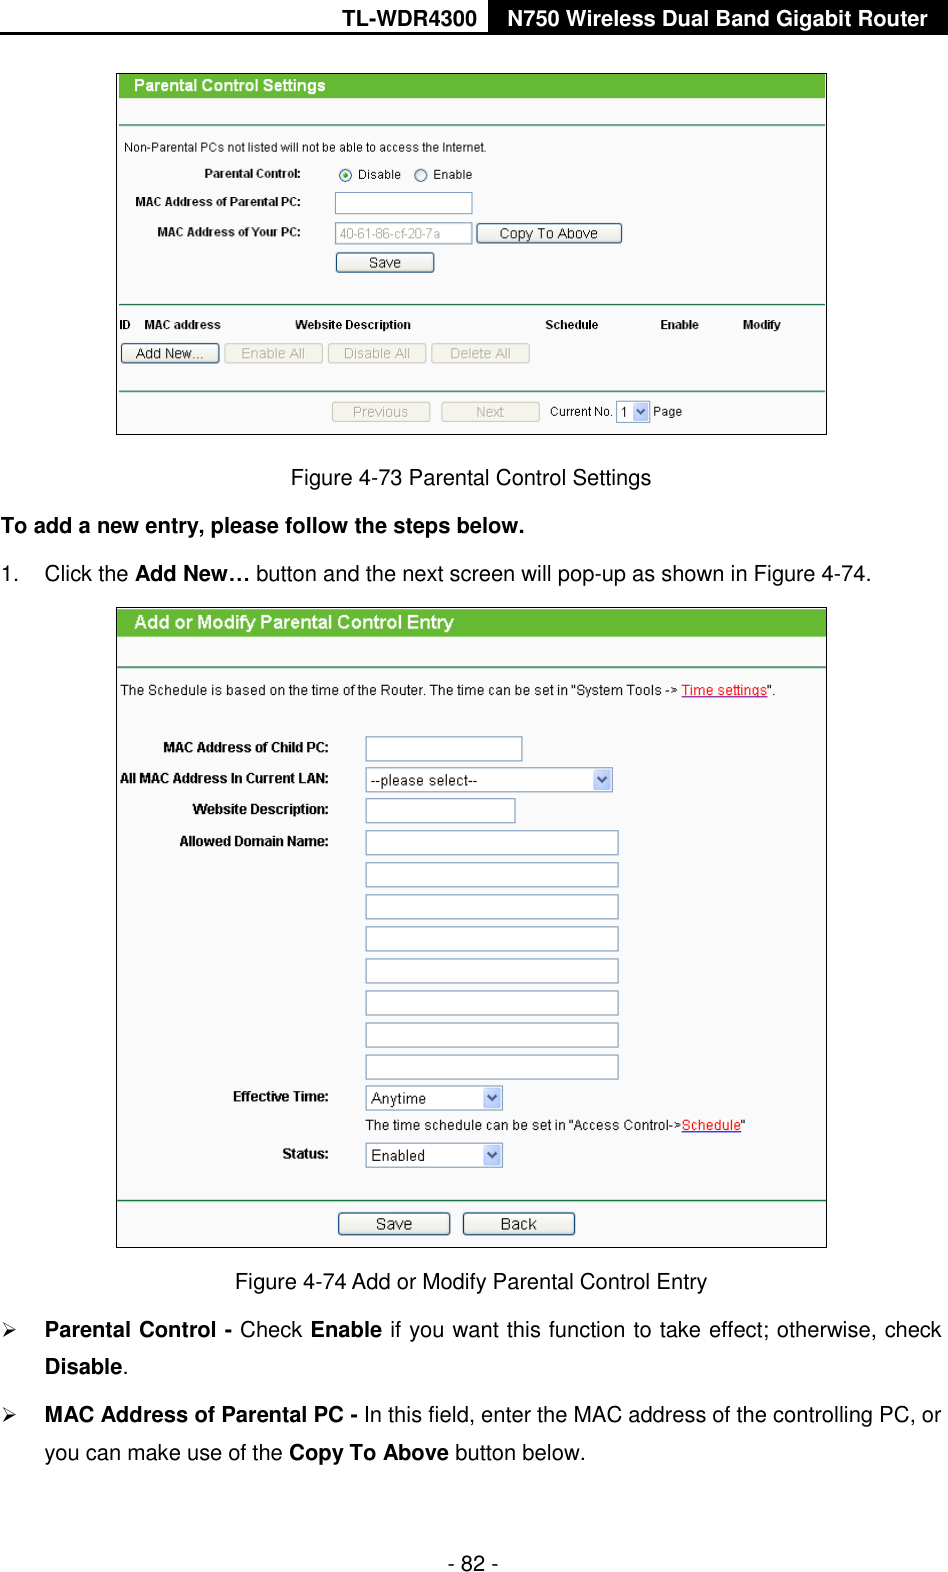 TL-WDR4300 N750 Wireless Dual Band Gigabit Router  - 82 -  Figure 4-73 Parental Control Settings To add a new entry, please follow the steps below. 1.  Click the Add New… button and the next screen will pop-up as shown in Figure 4-74.  Figure 4-74 Add or Modify Parental Control Entry  Parental Control - Check Enable if you want this function to take effect; otherwise, check Disable.    MAC Address of Parental PC - In this field, enter the MAC address of the controlling PC, or you can make use of the Copy To Above button below.   